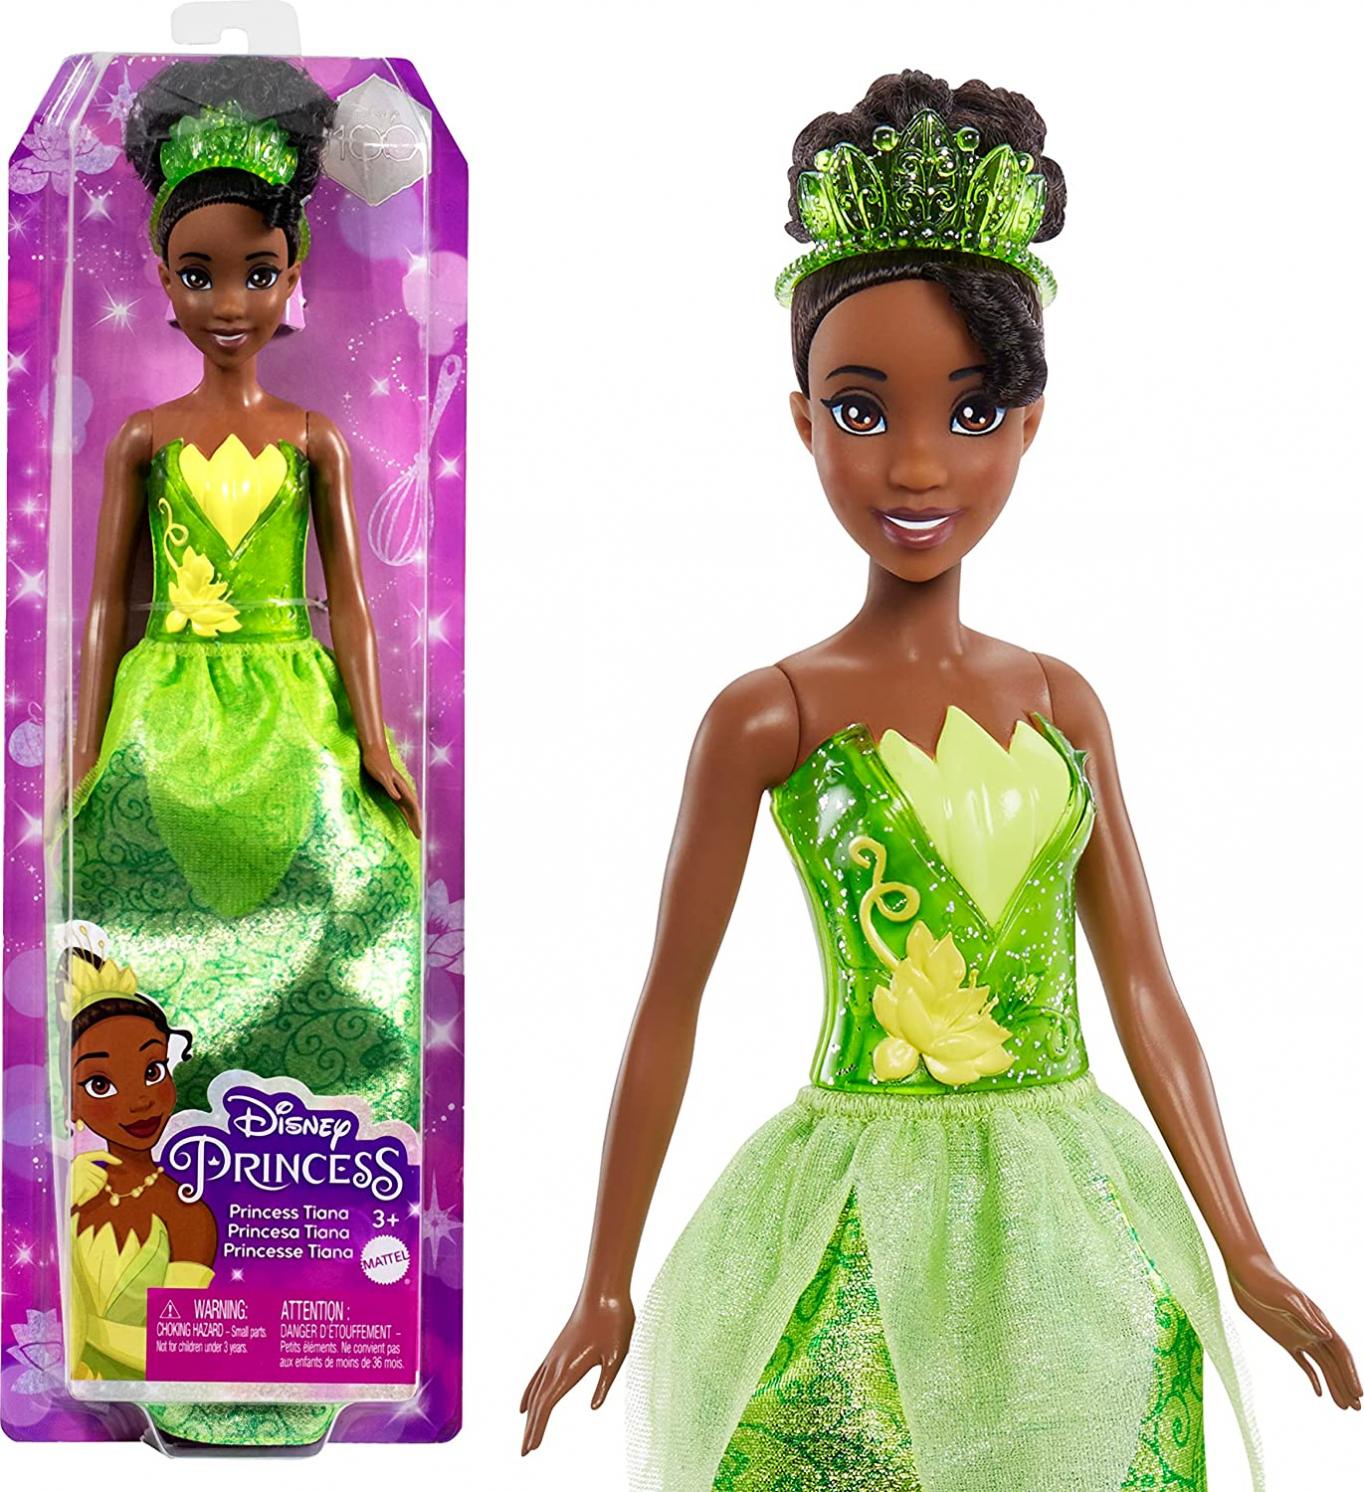 Disney Princess Tiana Fashion Doll, New for 2023, Sparkling Look with Brown Hair, Brown Eyes & Tiara Accessory